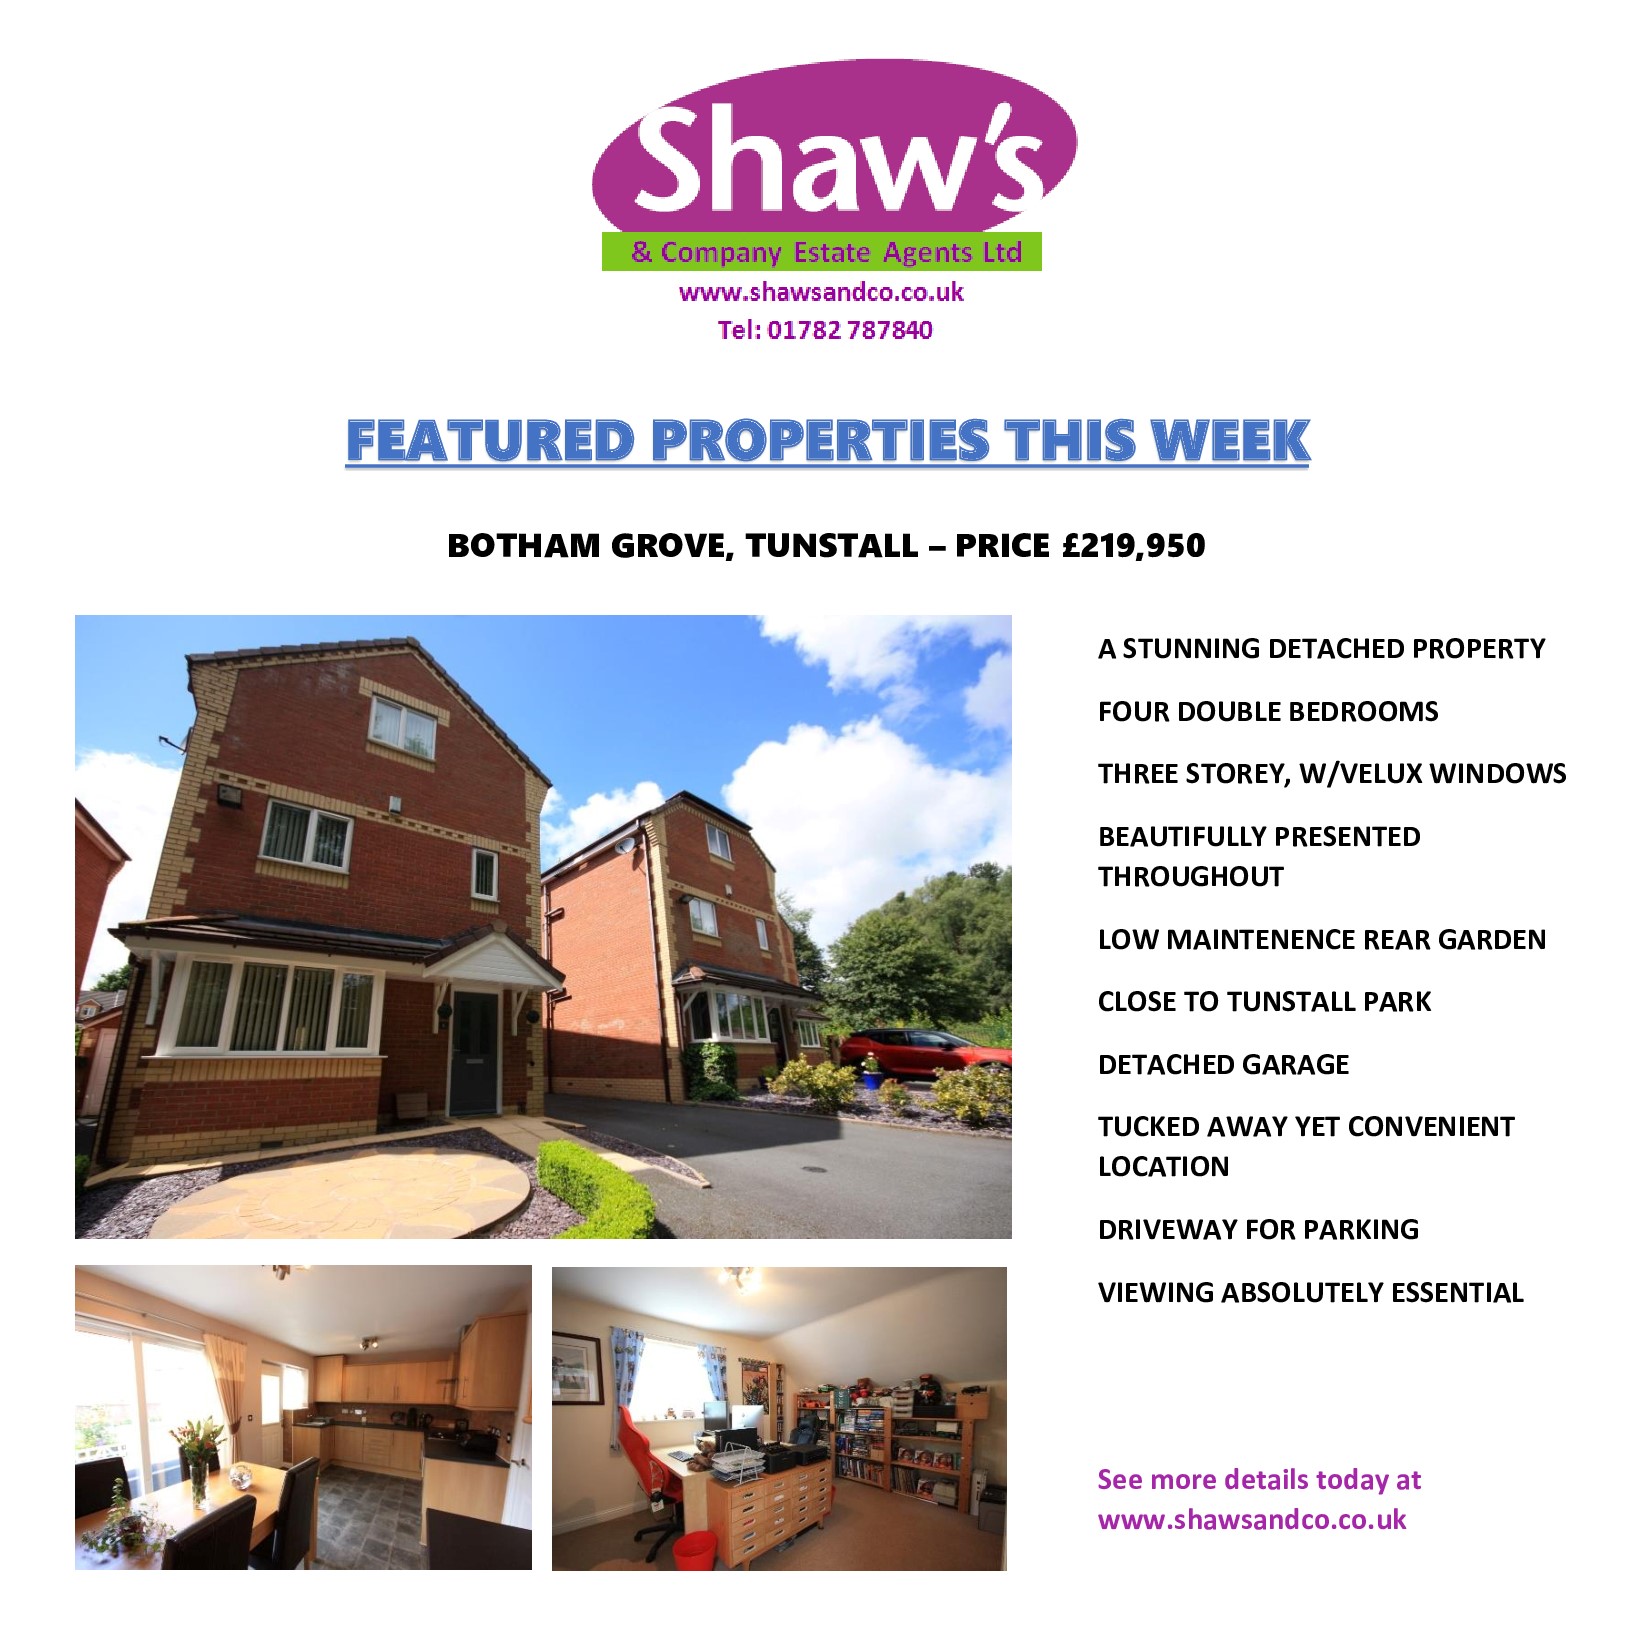 NEW OTM & FEATURED PROPERTIES THIS WEEK!